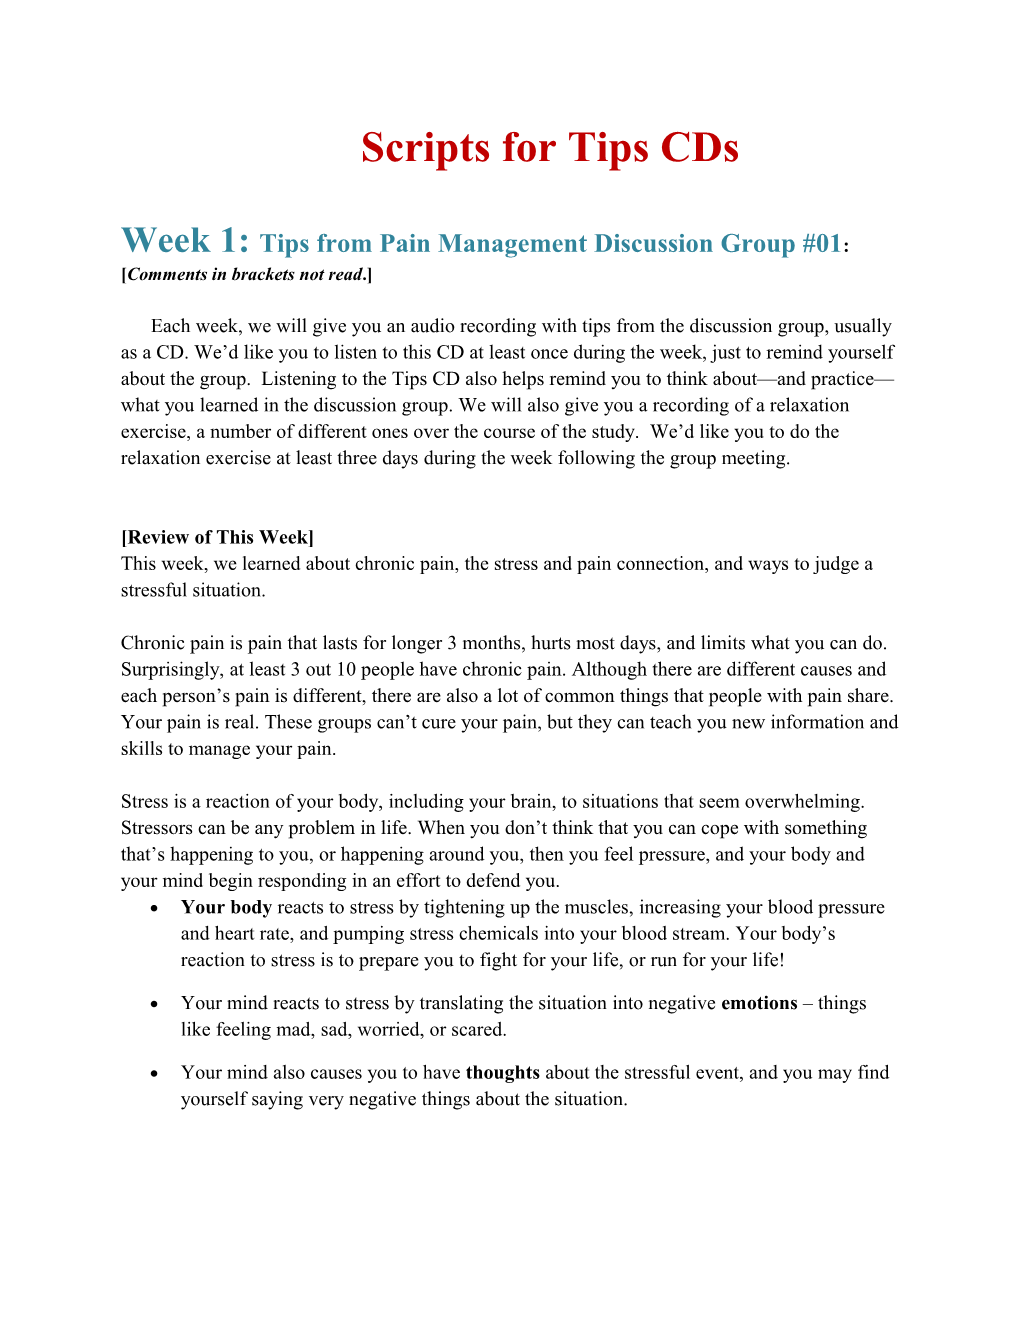 Week 1: Tips from Pain Management Discussion Group #01: Comments in Brackets Not Read